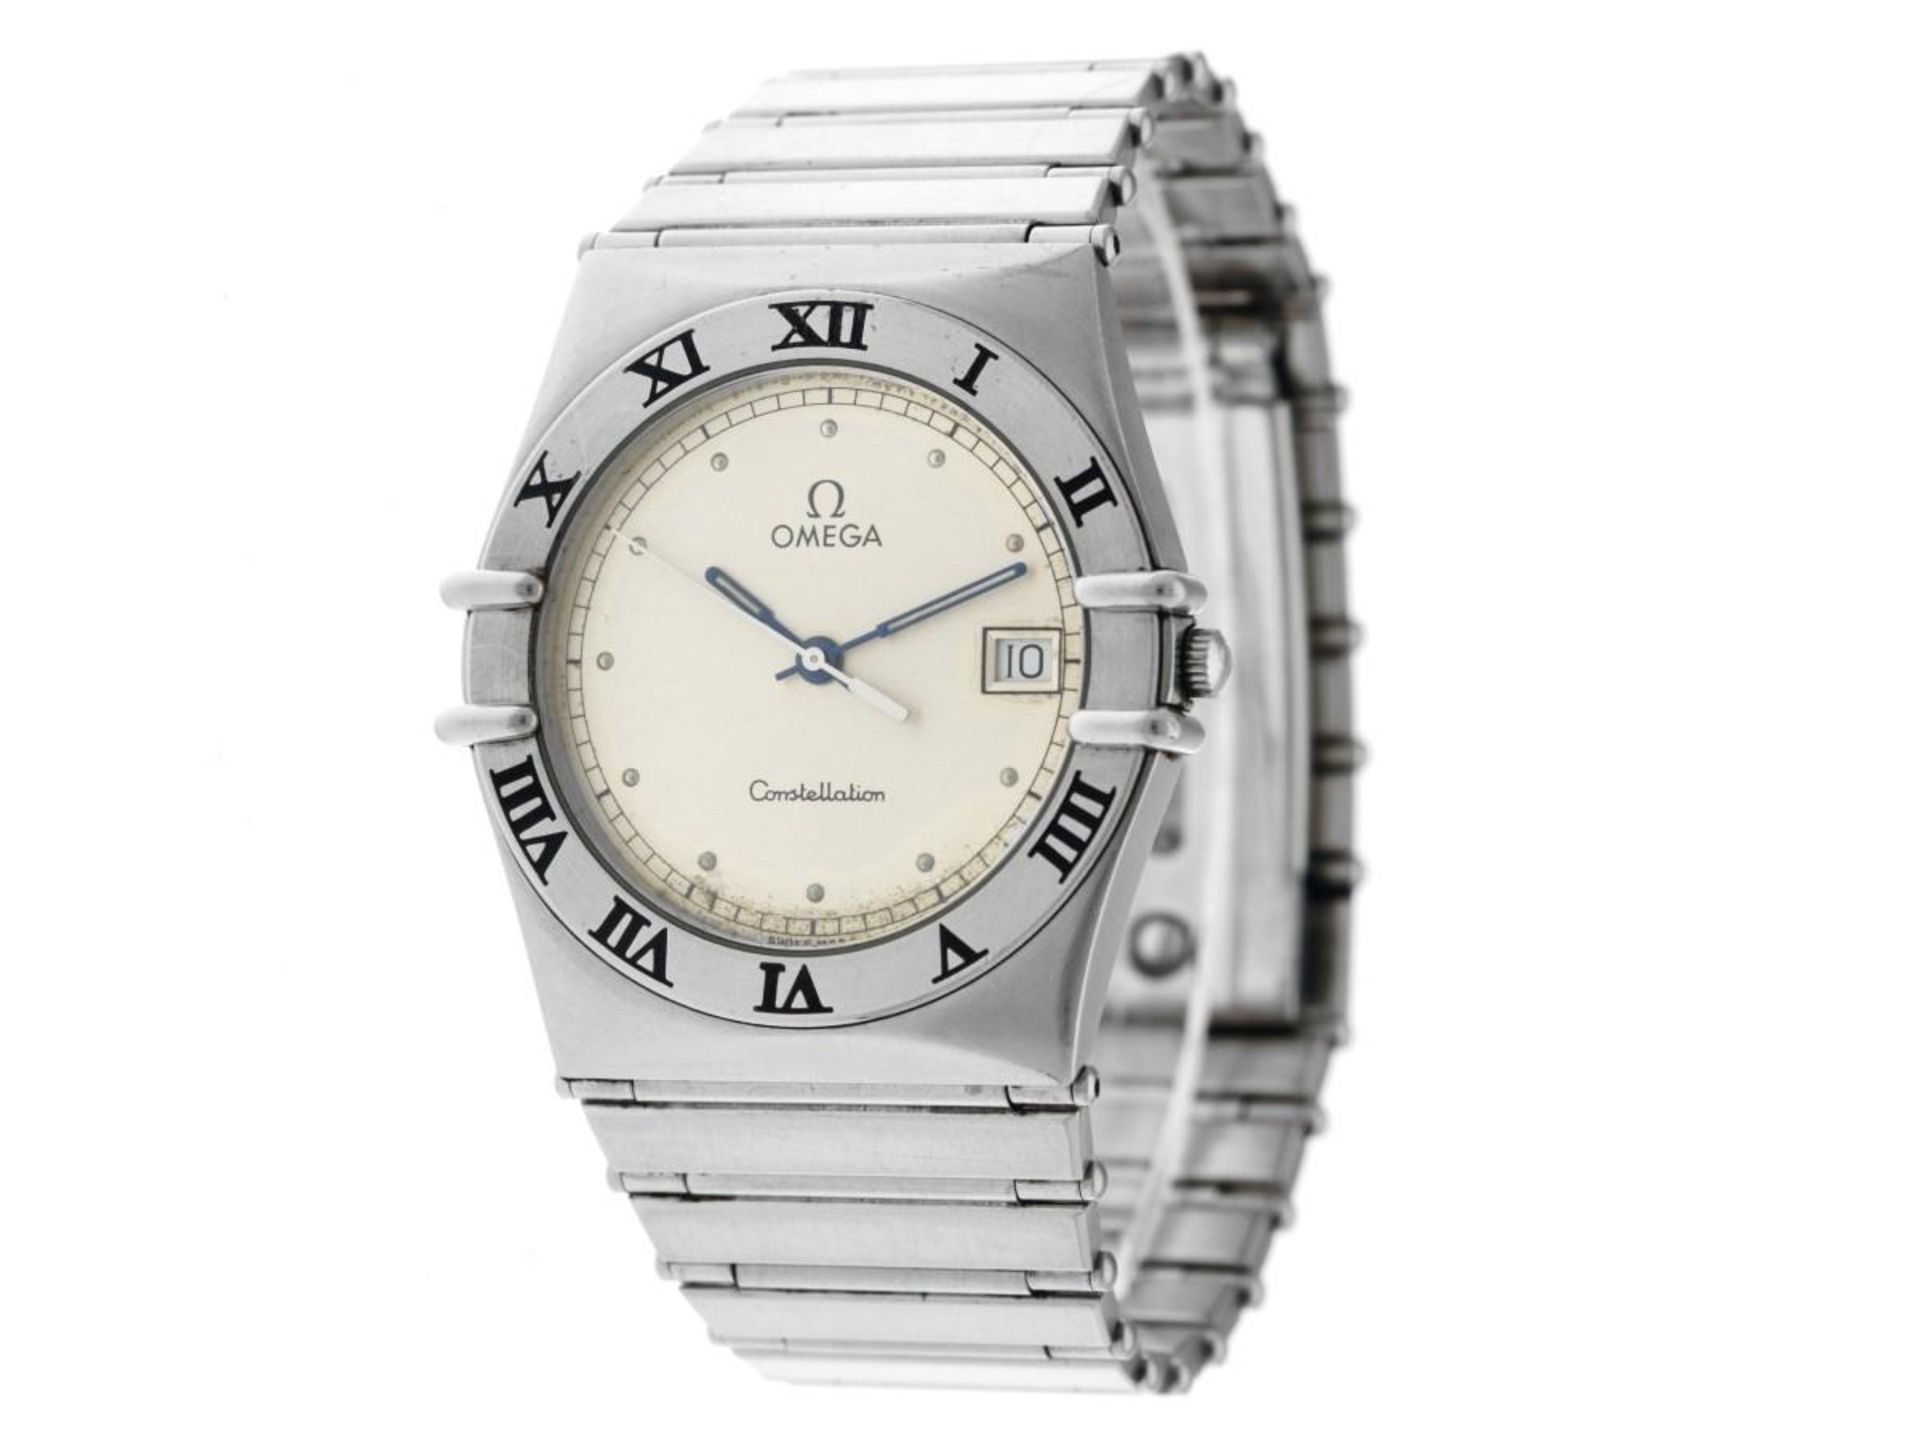 Omega Constellation 3961076 - Men's watch - approx. 1990. - Image 2 of 5